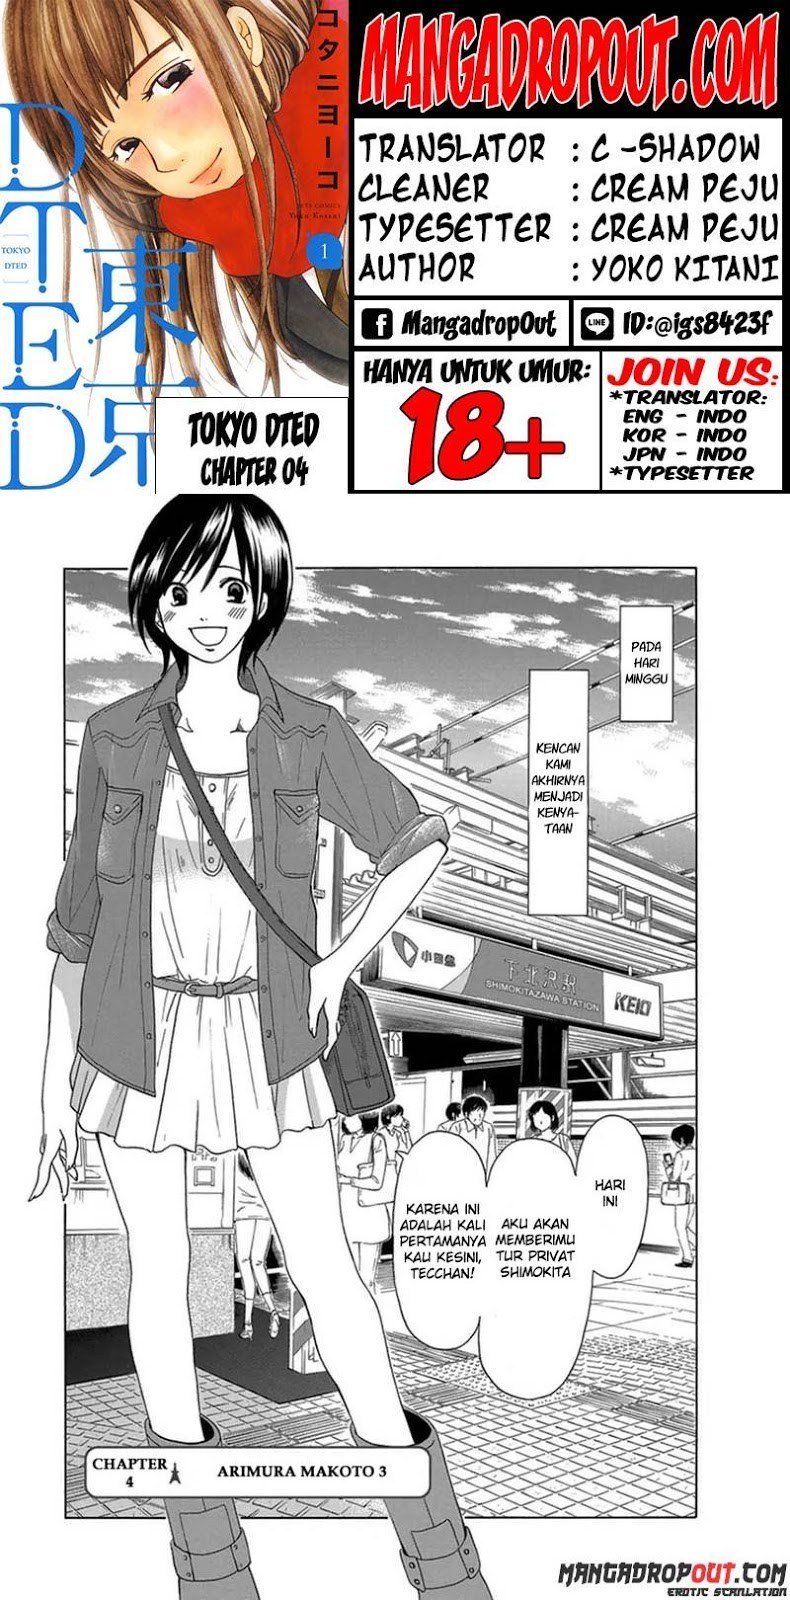 Tokyo DTED Chapter 04